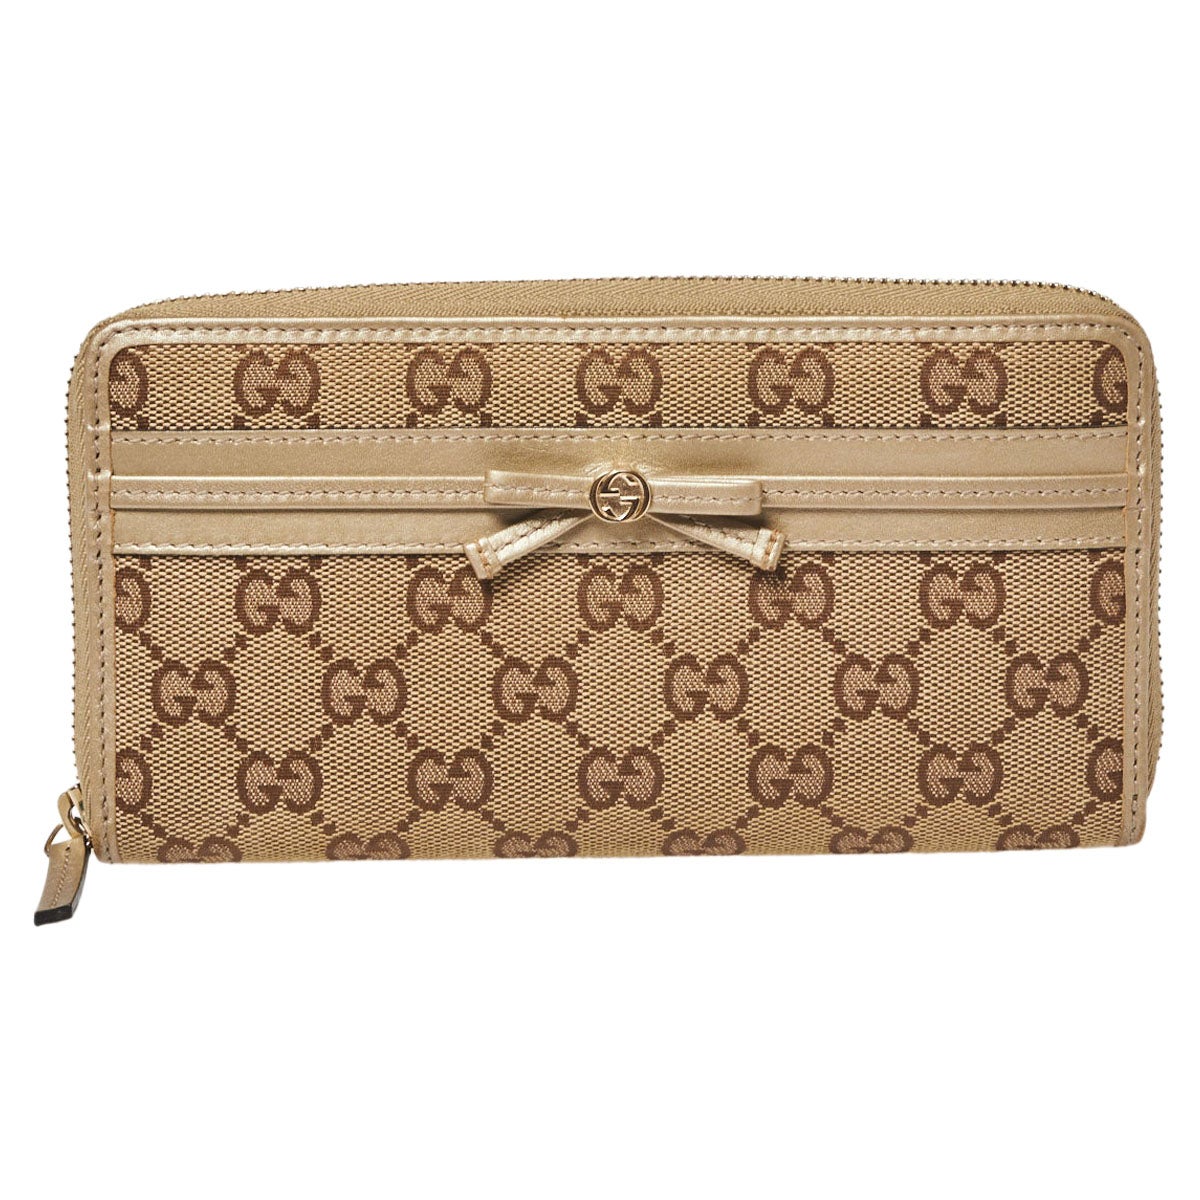 Gucci Beige/Ebony GG Canvas and Leather Zip Around Wallet at 